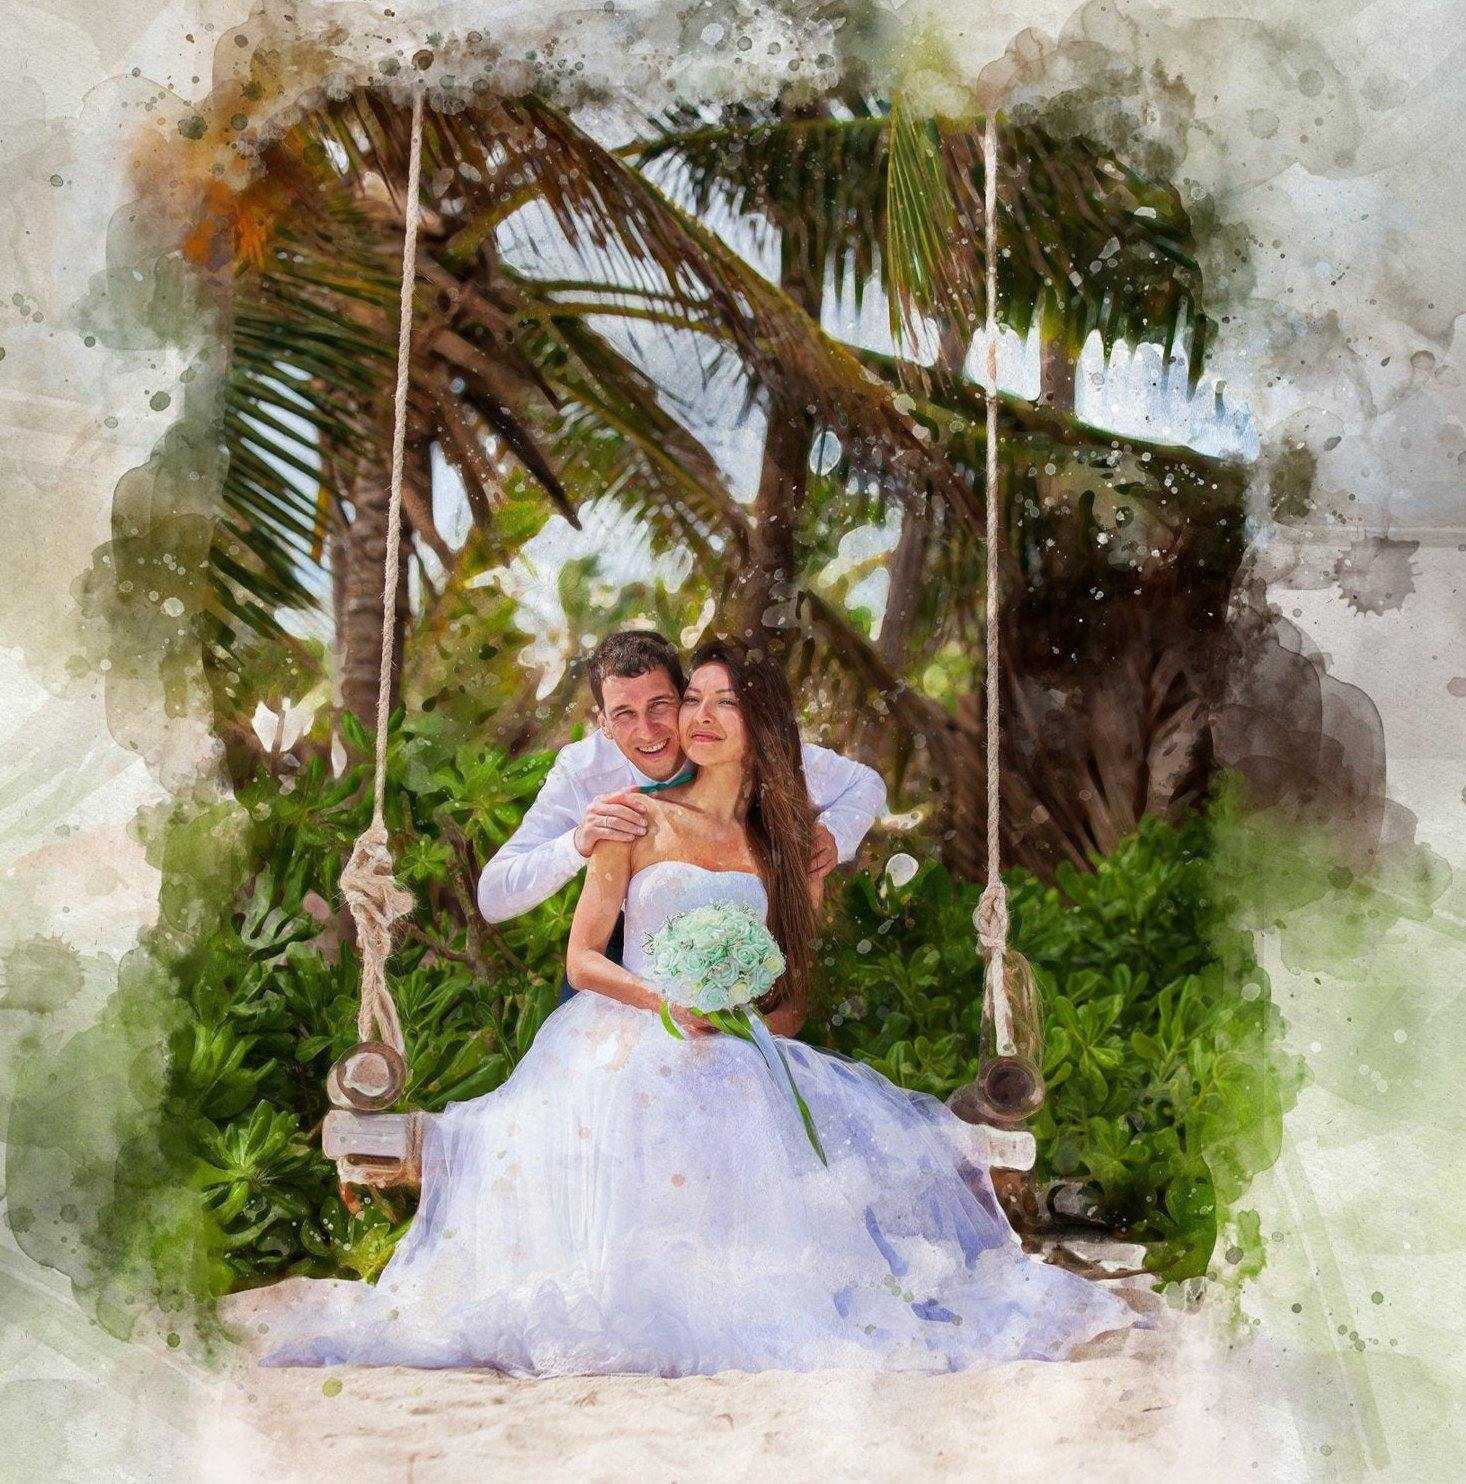 Art from Photo, Personalized Wedding Gifts, Wedding Gift Ideas, Personalized Picture Gifts - FromPicToArt